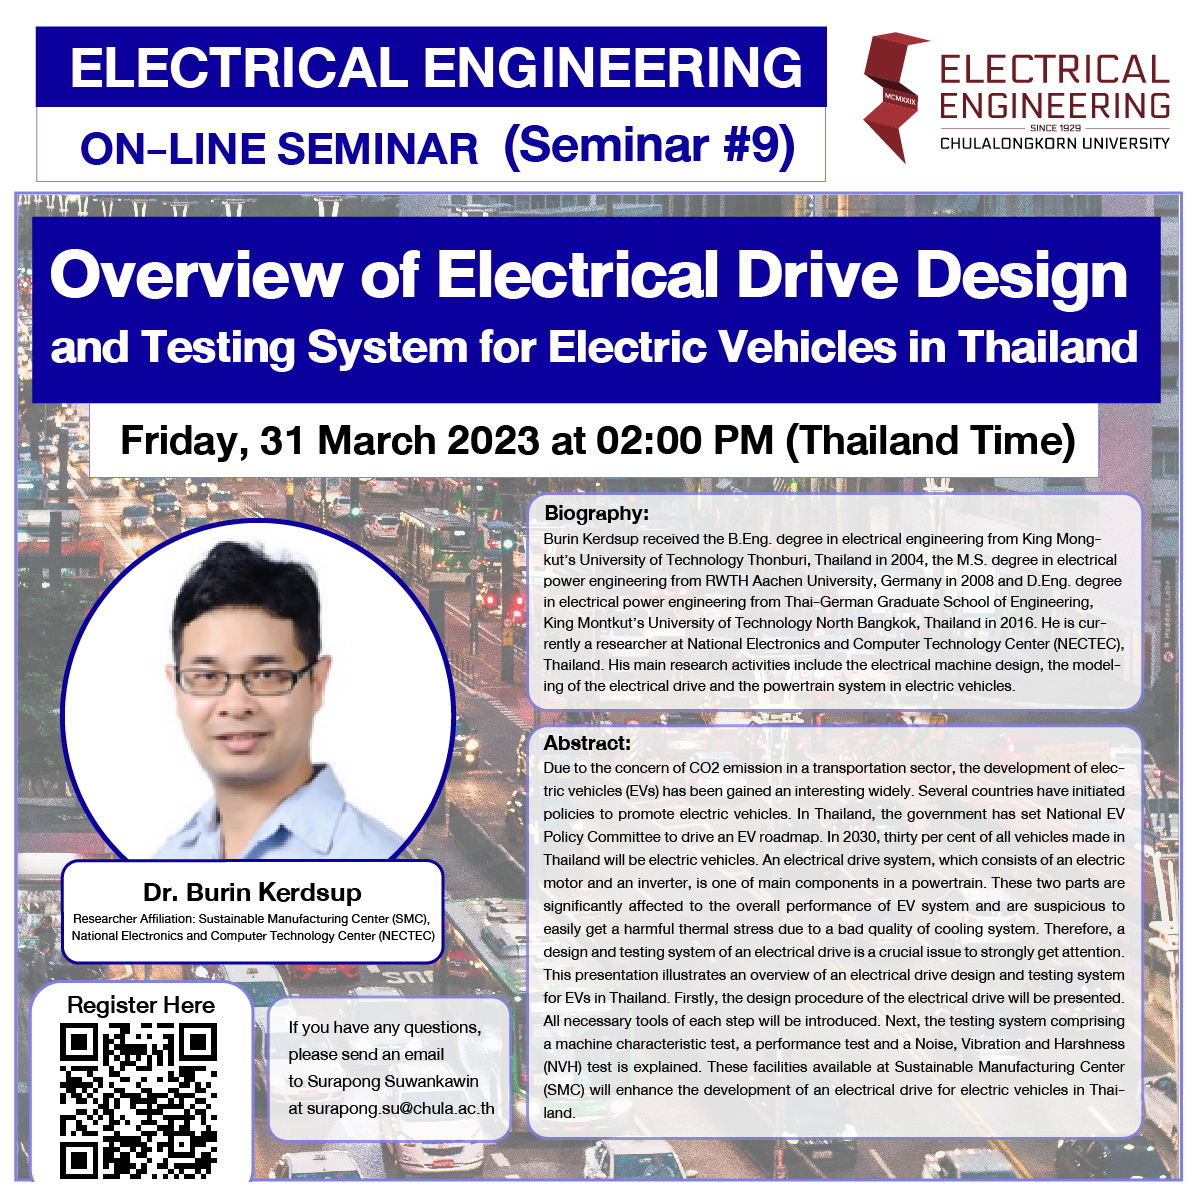 ELECTRICAL ENGINEERING ON-LINE SEMINAR (Seminar #9) "Overview of Electrical Drive Design and Testing System for Electric Vehicles in Thailand"